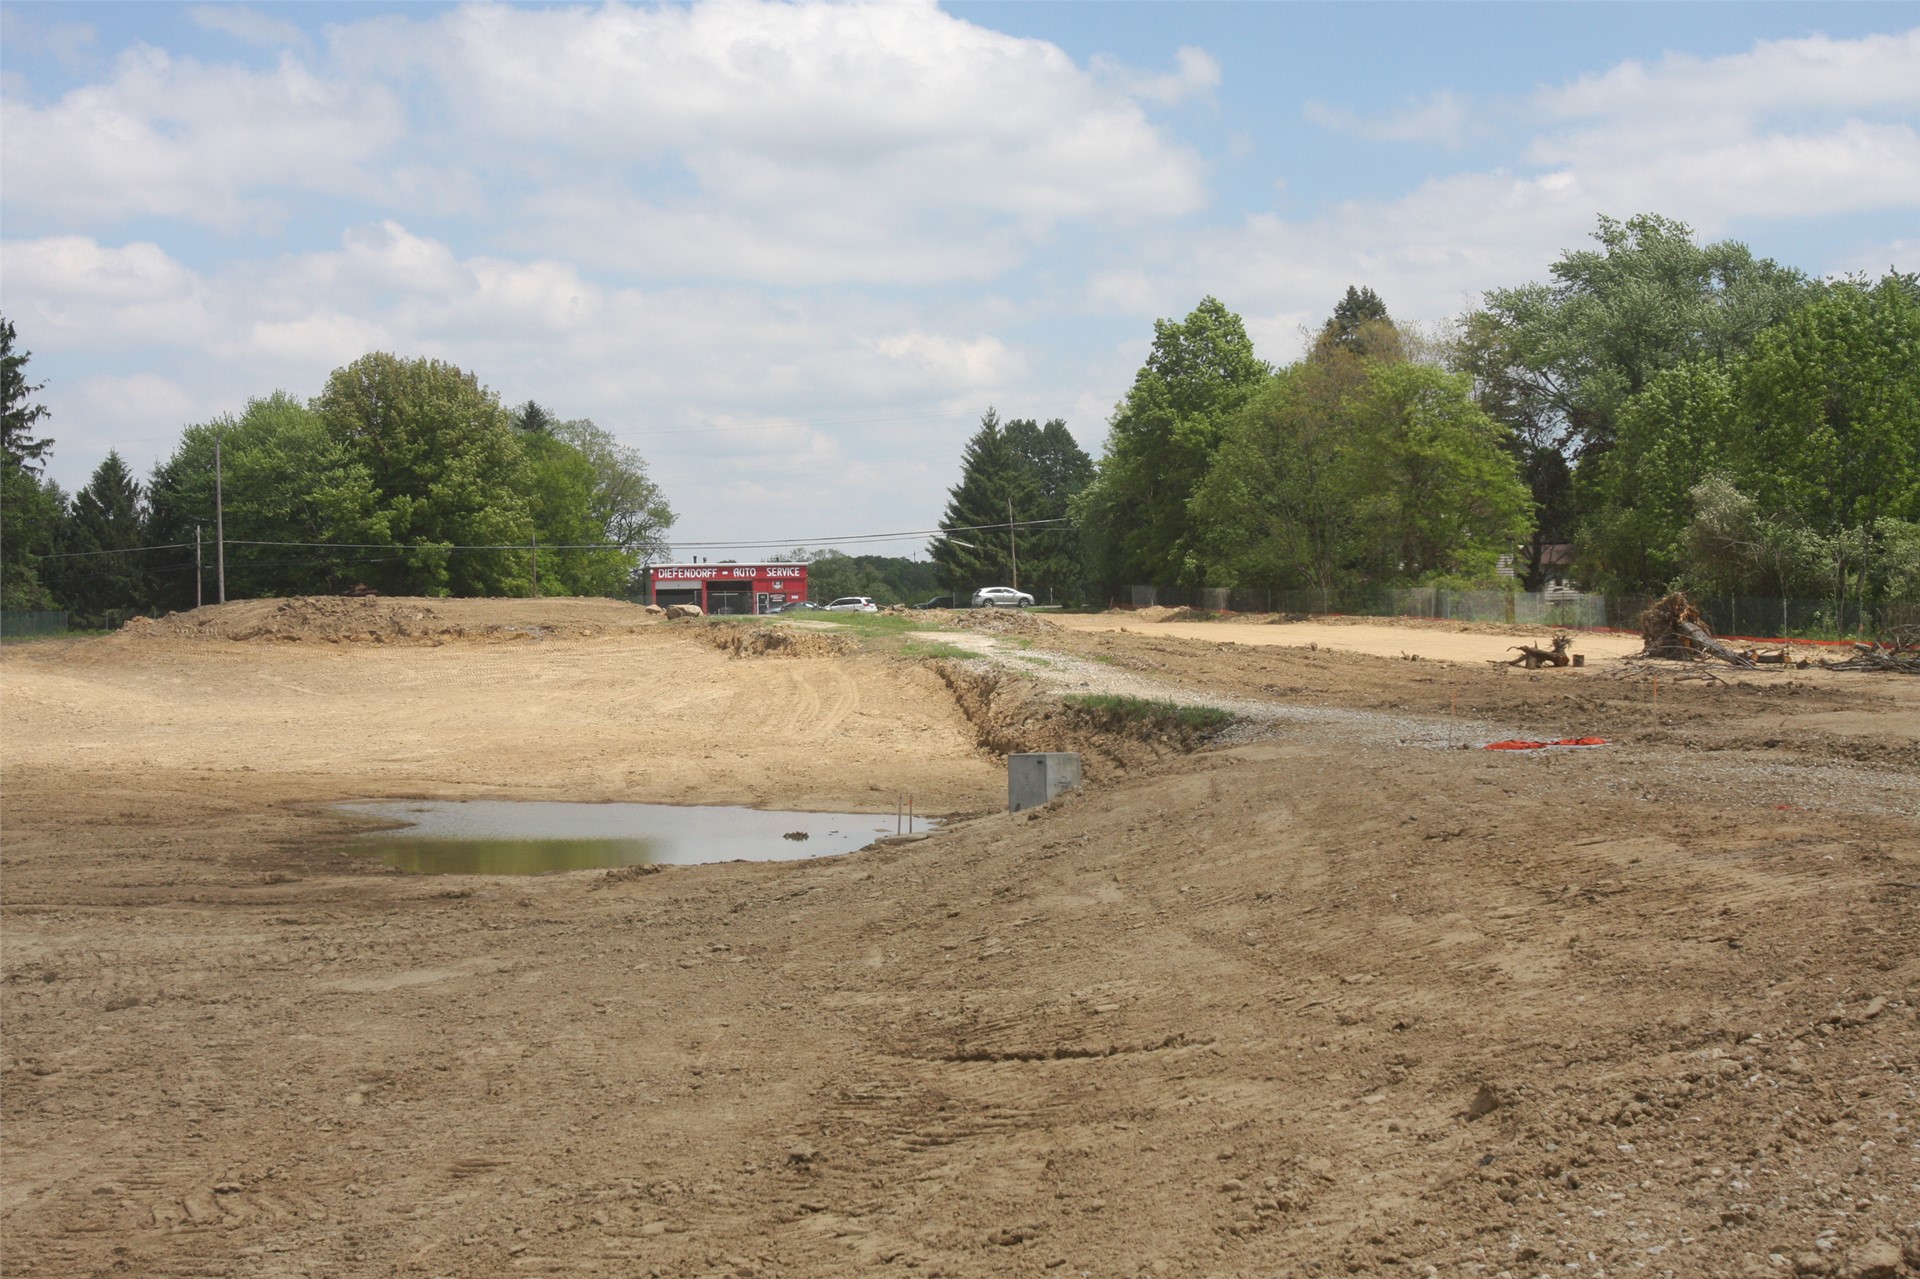 Another image of main drive/retention basin